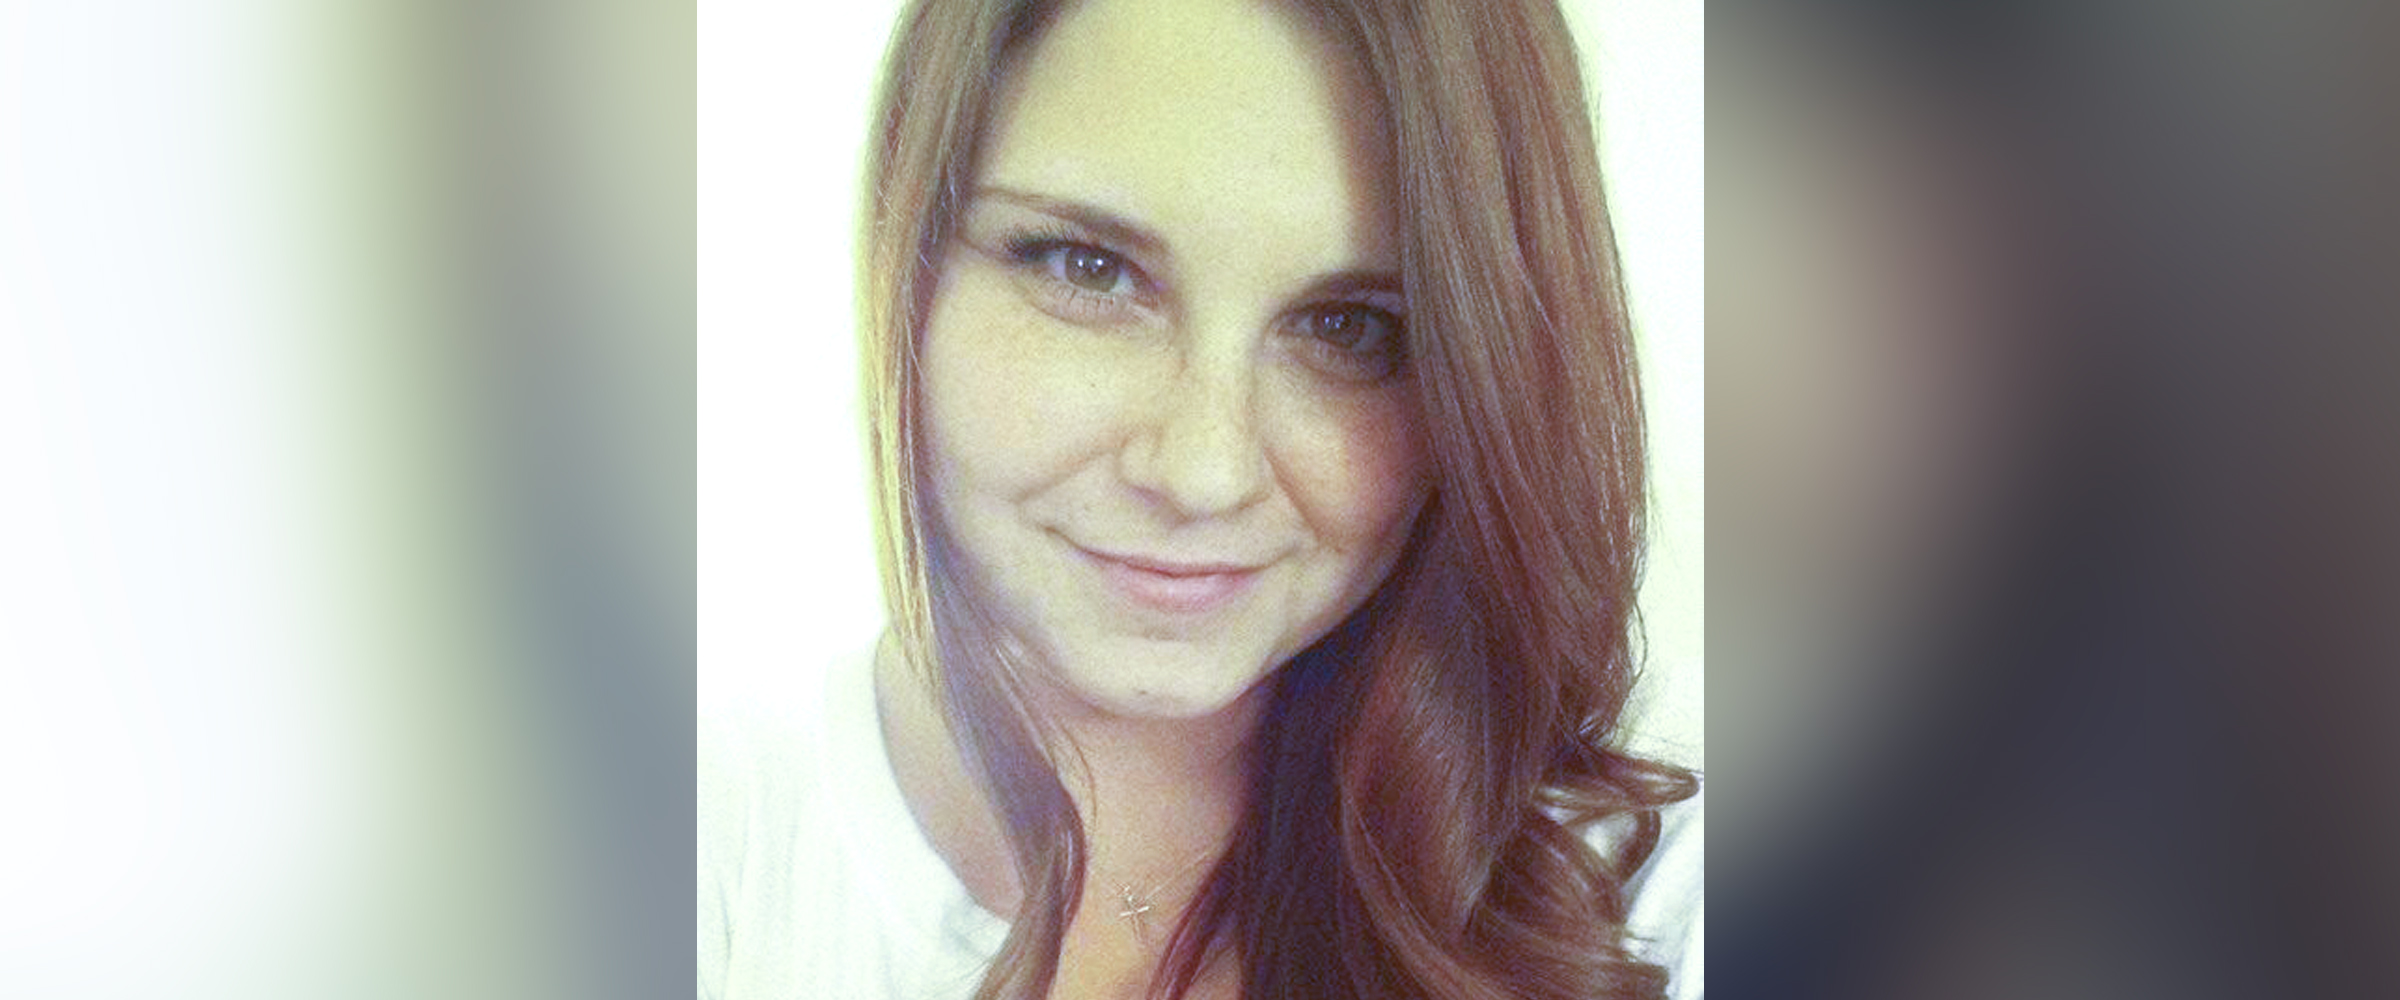 PHOTO: Heather Heyer, 32, was killed when a car rammed into a crowd during a march in Charlottesville, Virginia on August 13, 2017.